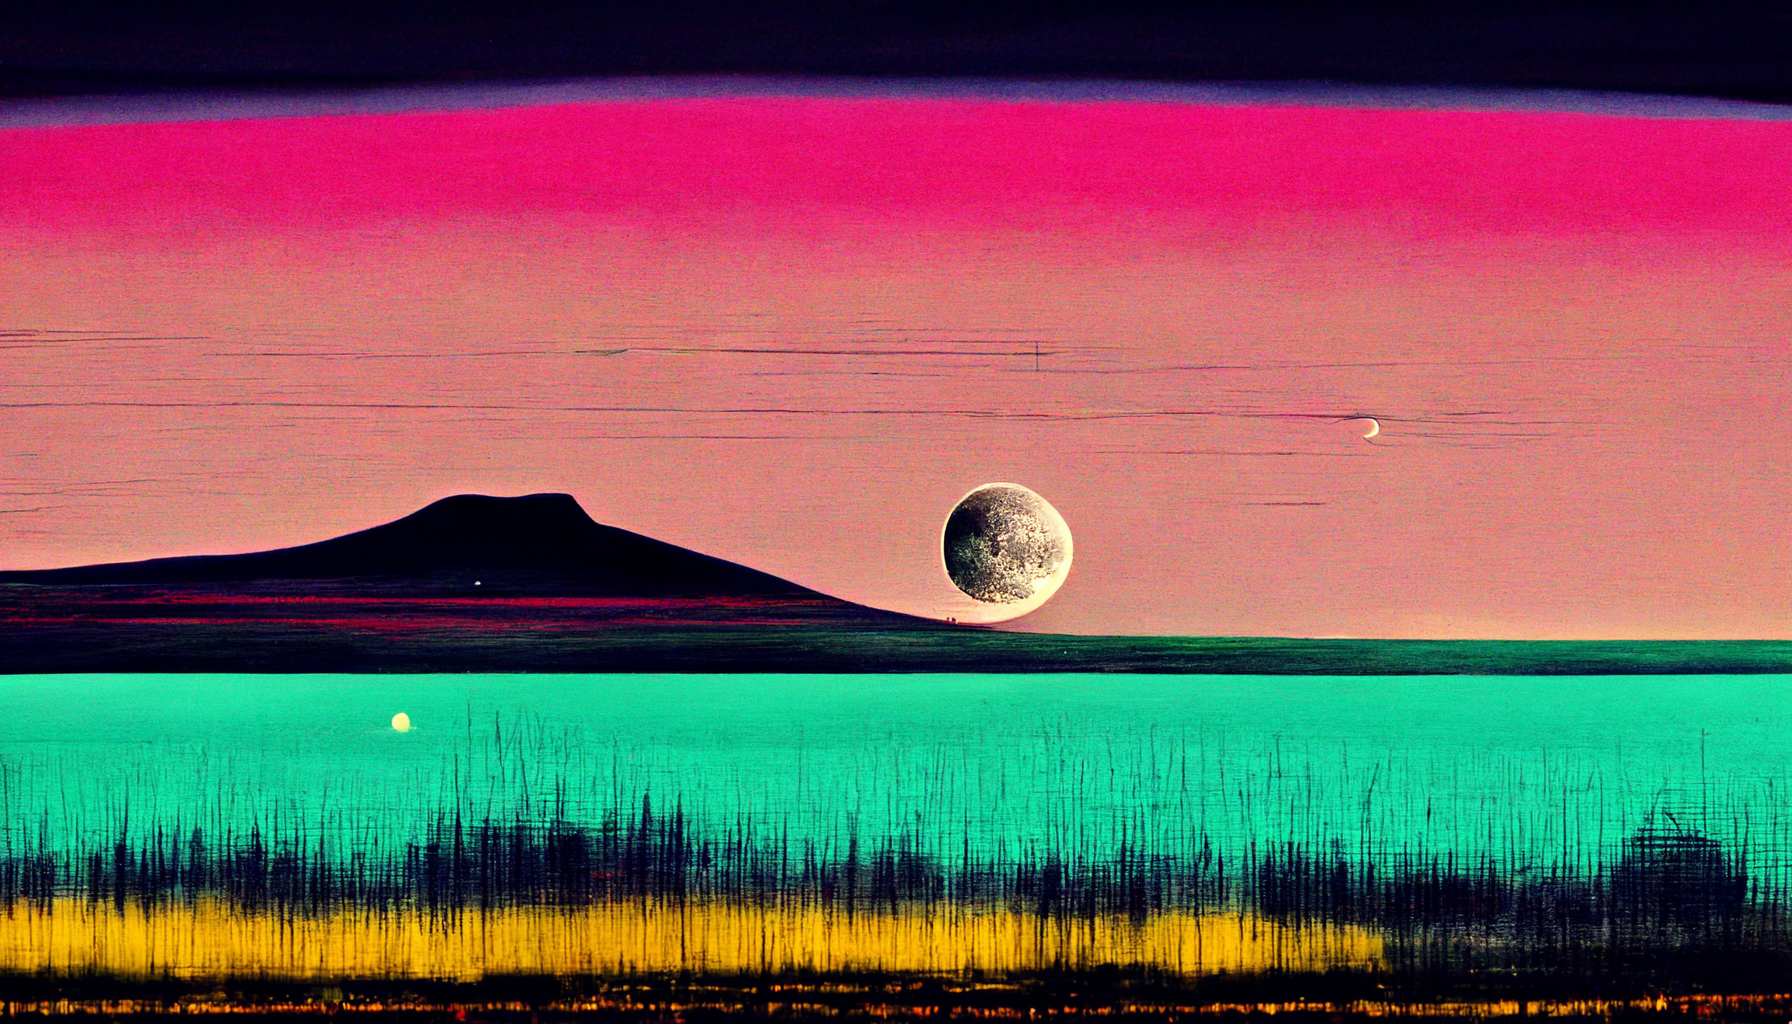 Another AI-generated image of a dreamy 80s landscape with a mountain (maybe a volcano?) in the distance